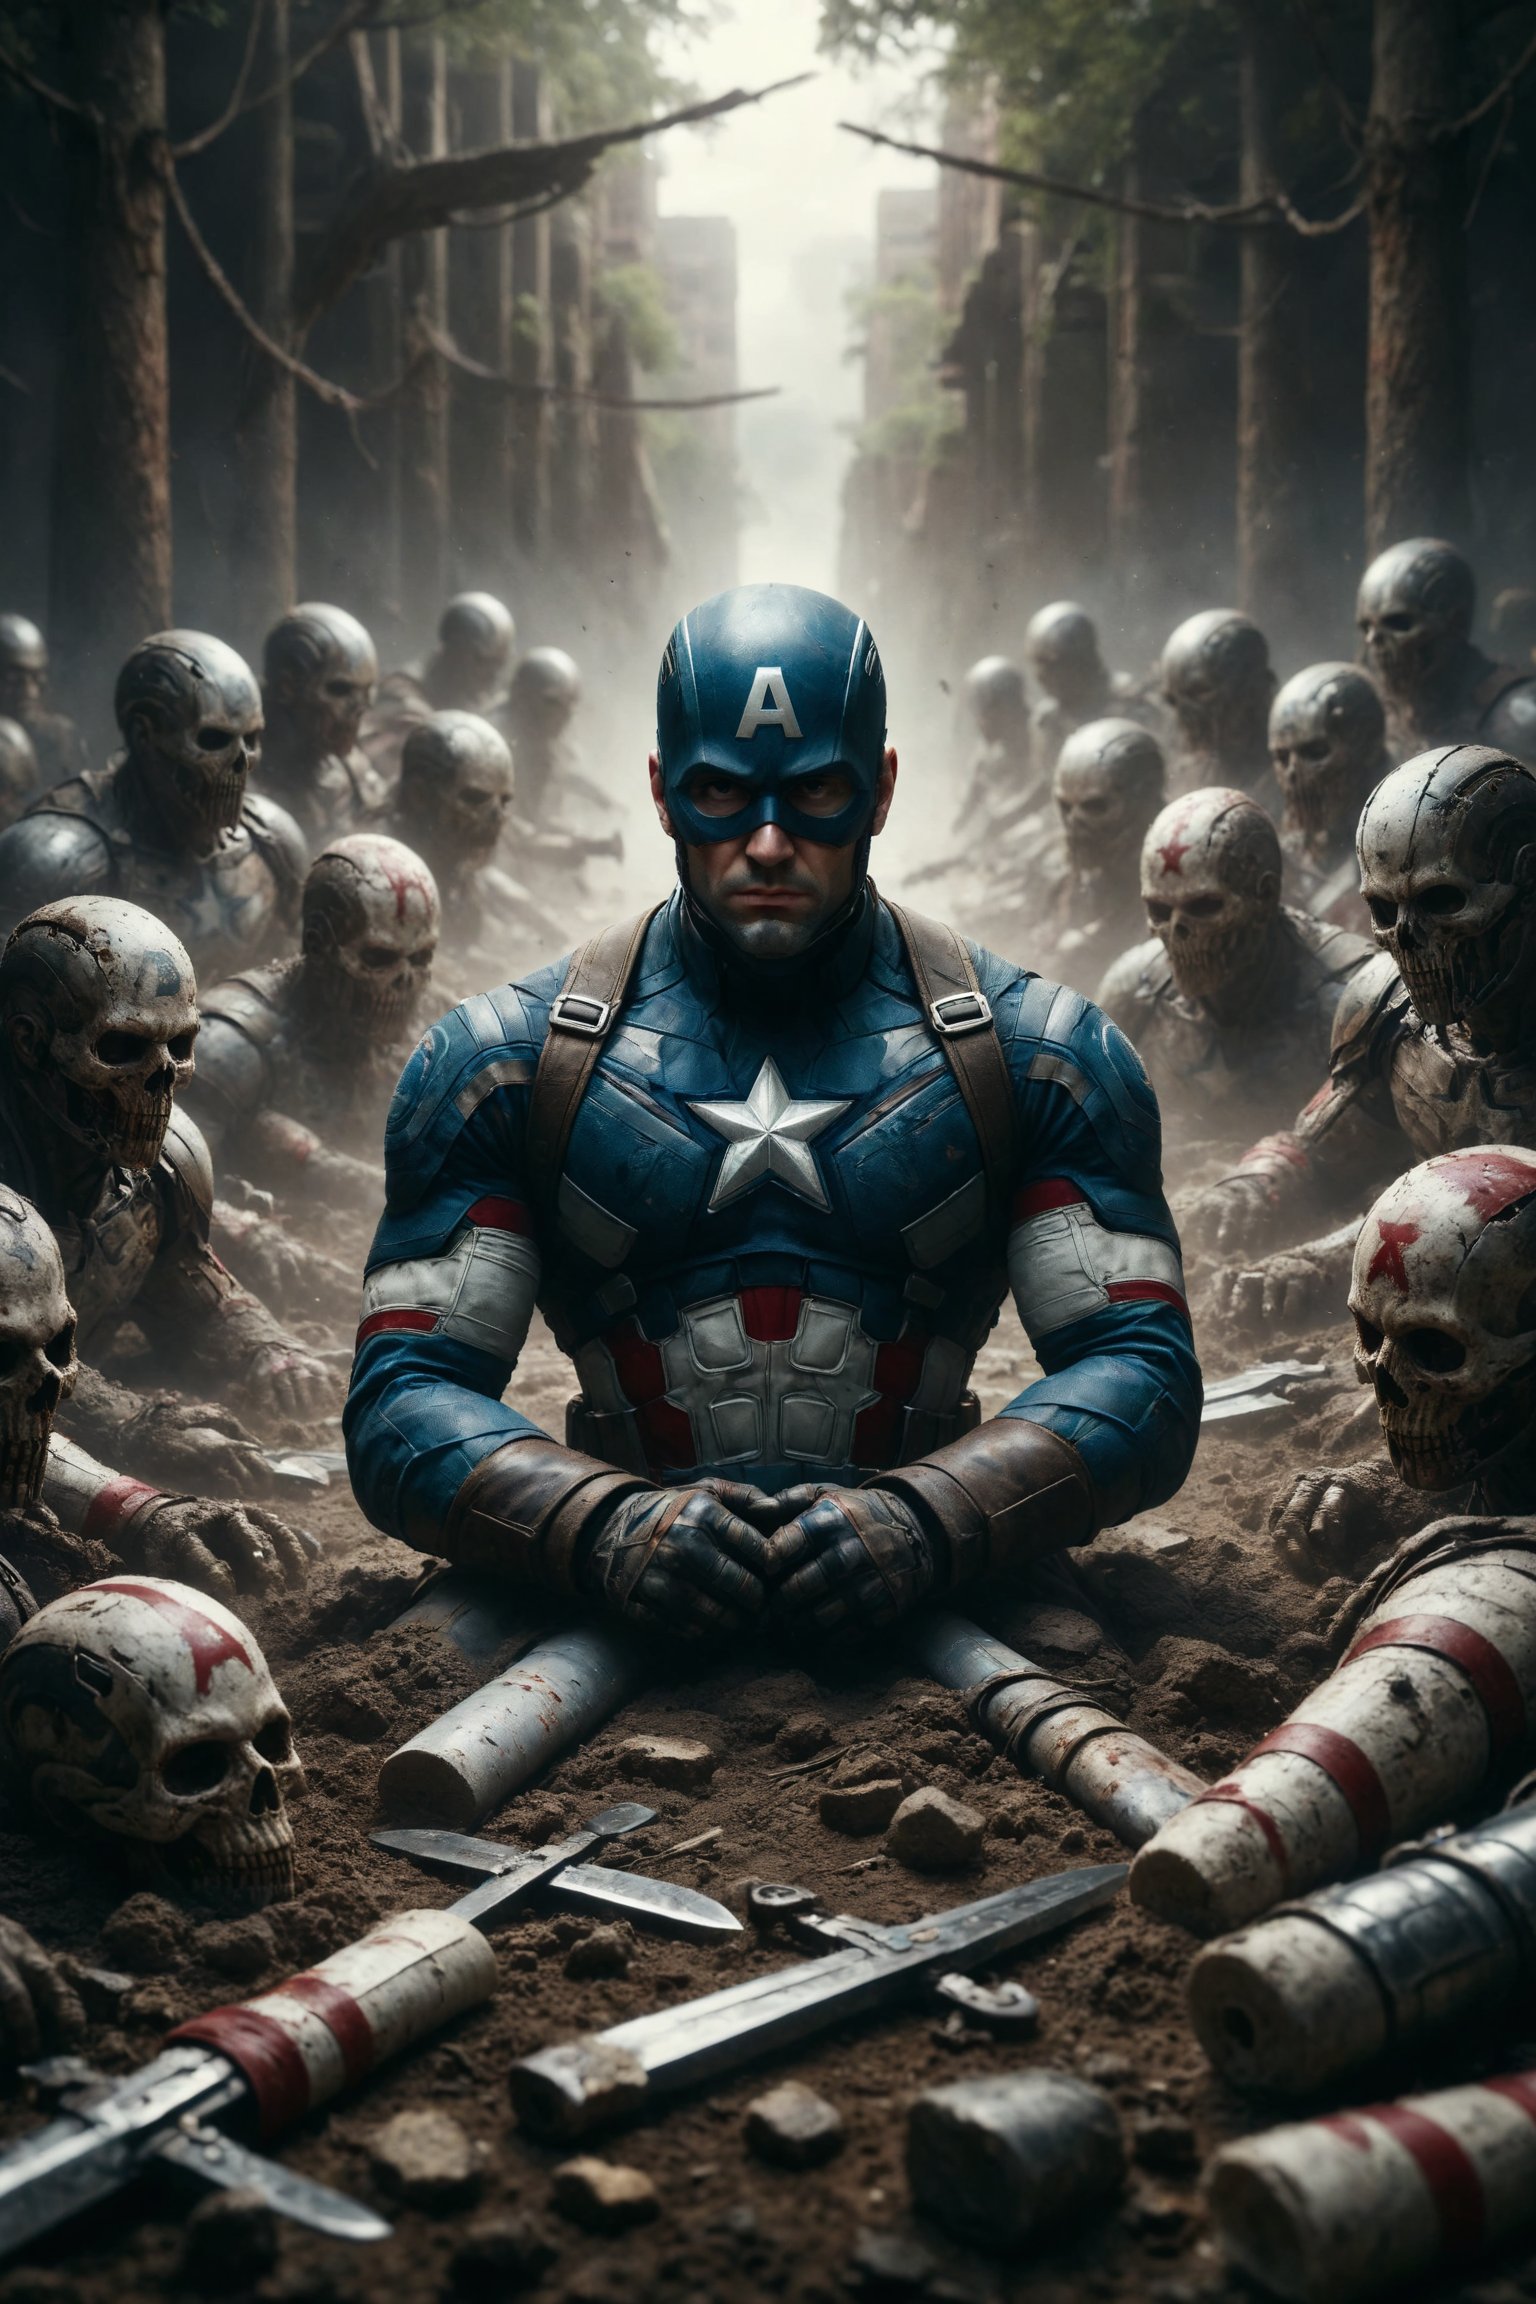 Design a scene of Captain America trapped among 8 swords stuck in the ground, blindfolded and surrounded by bandages, symbolizing limitation, self-limitation, and feeling trapped.